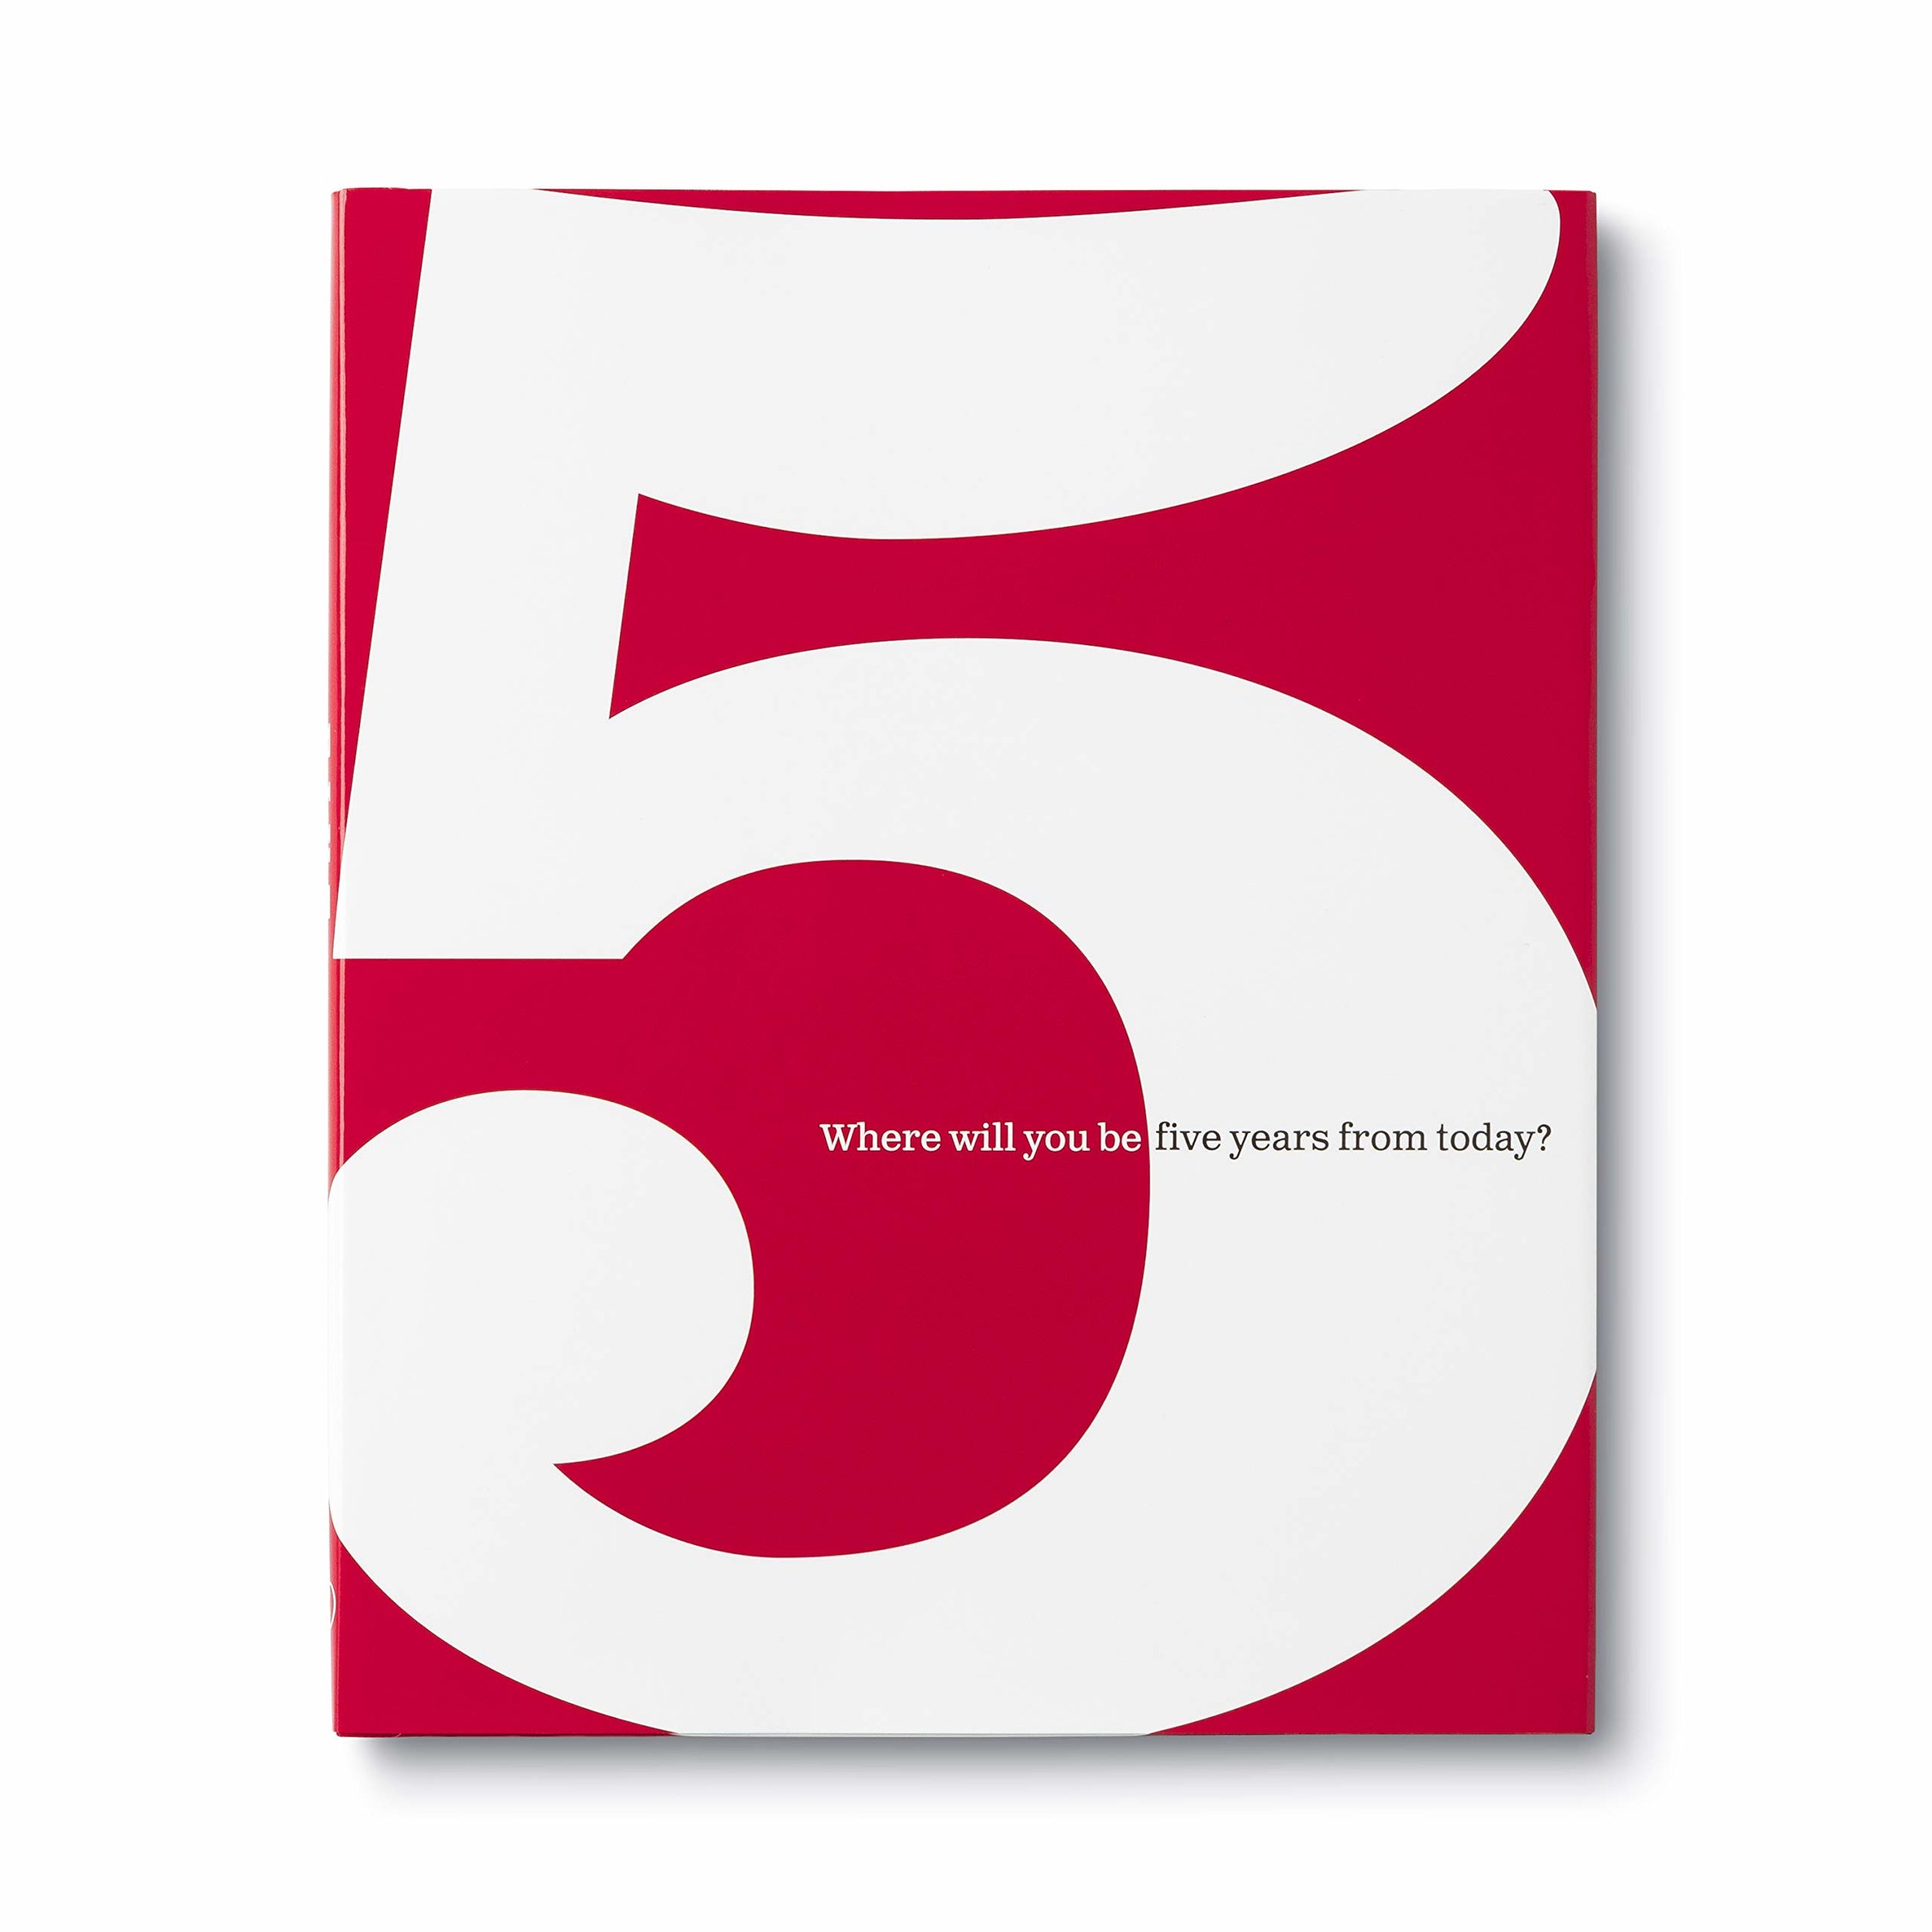 5: Where Will You Be Five Years from Today? (Copy) (Copy)